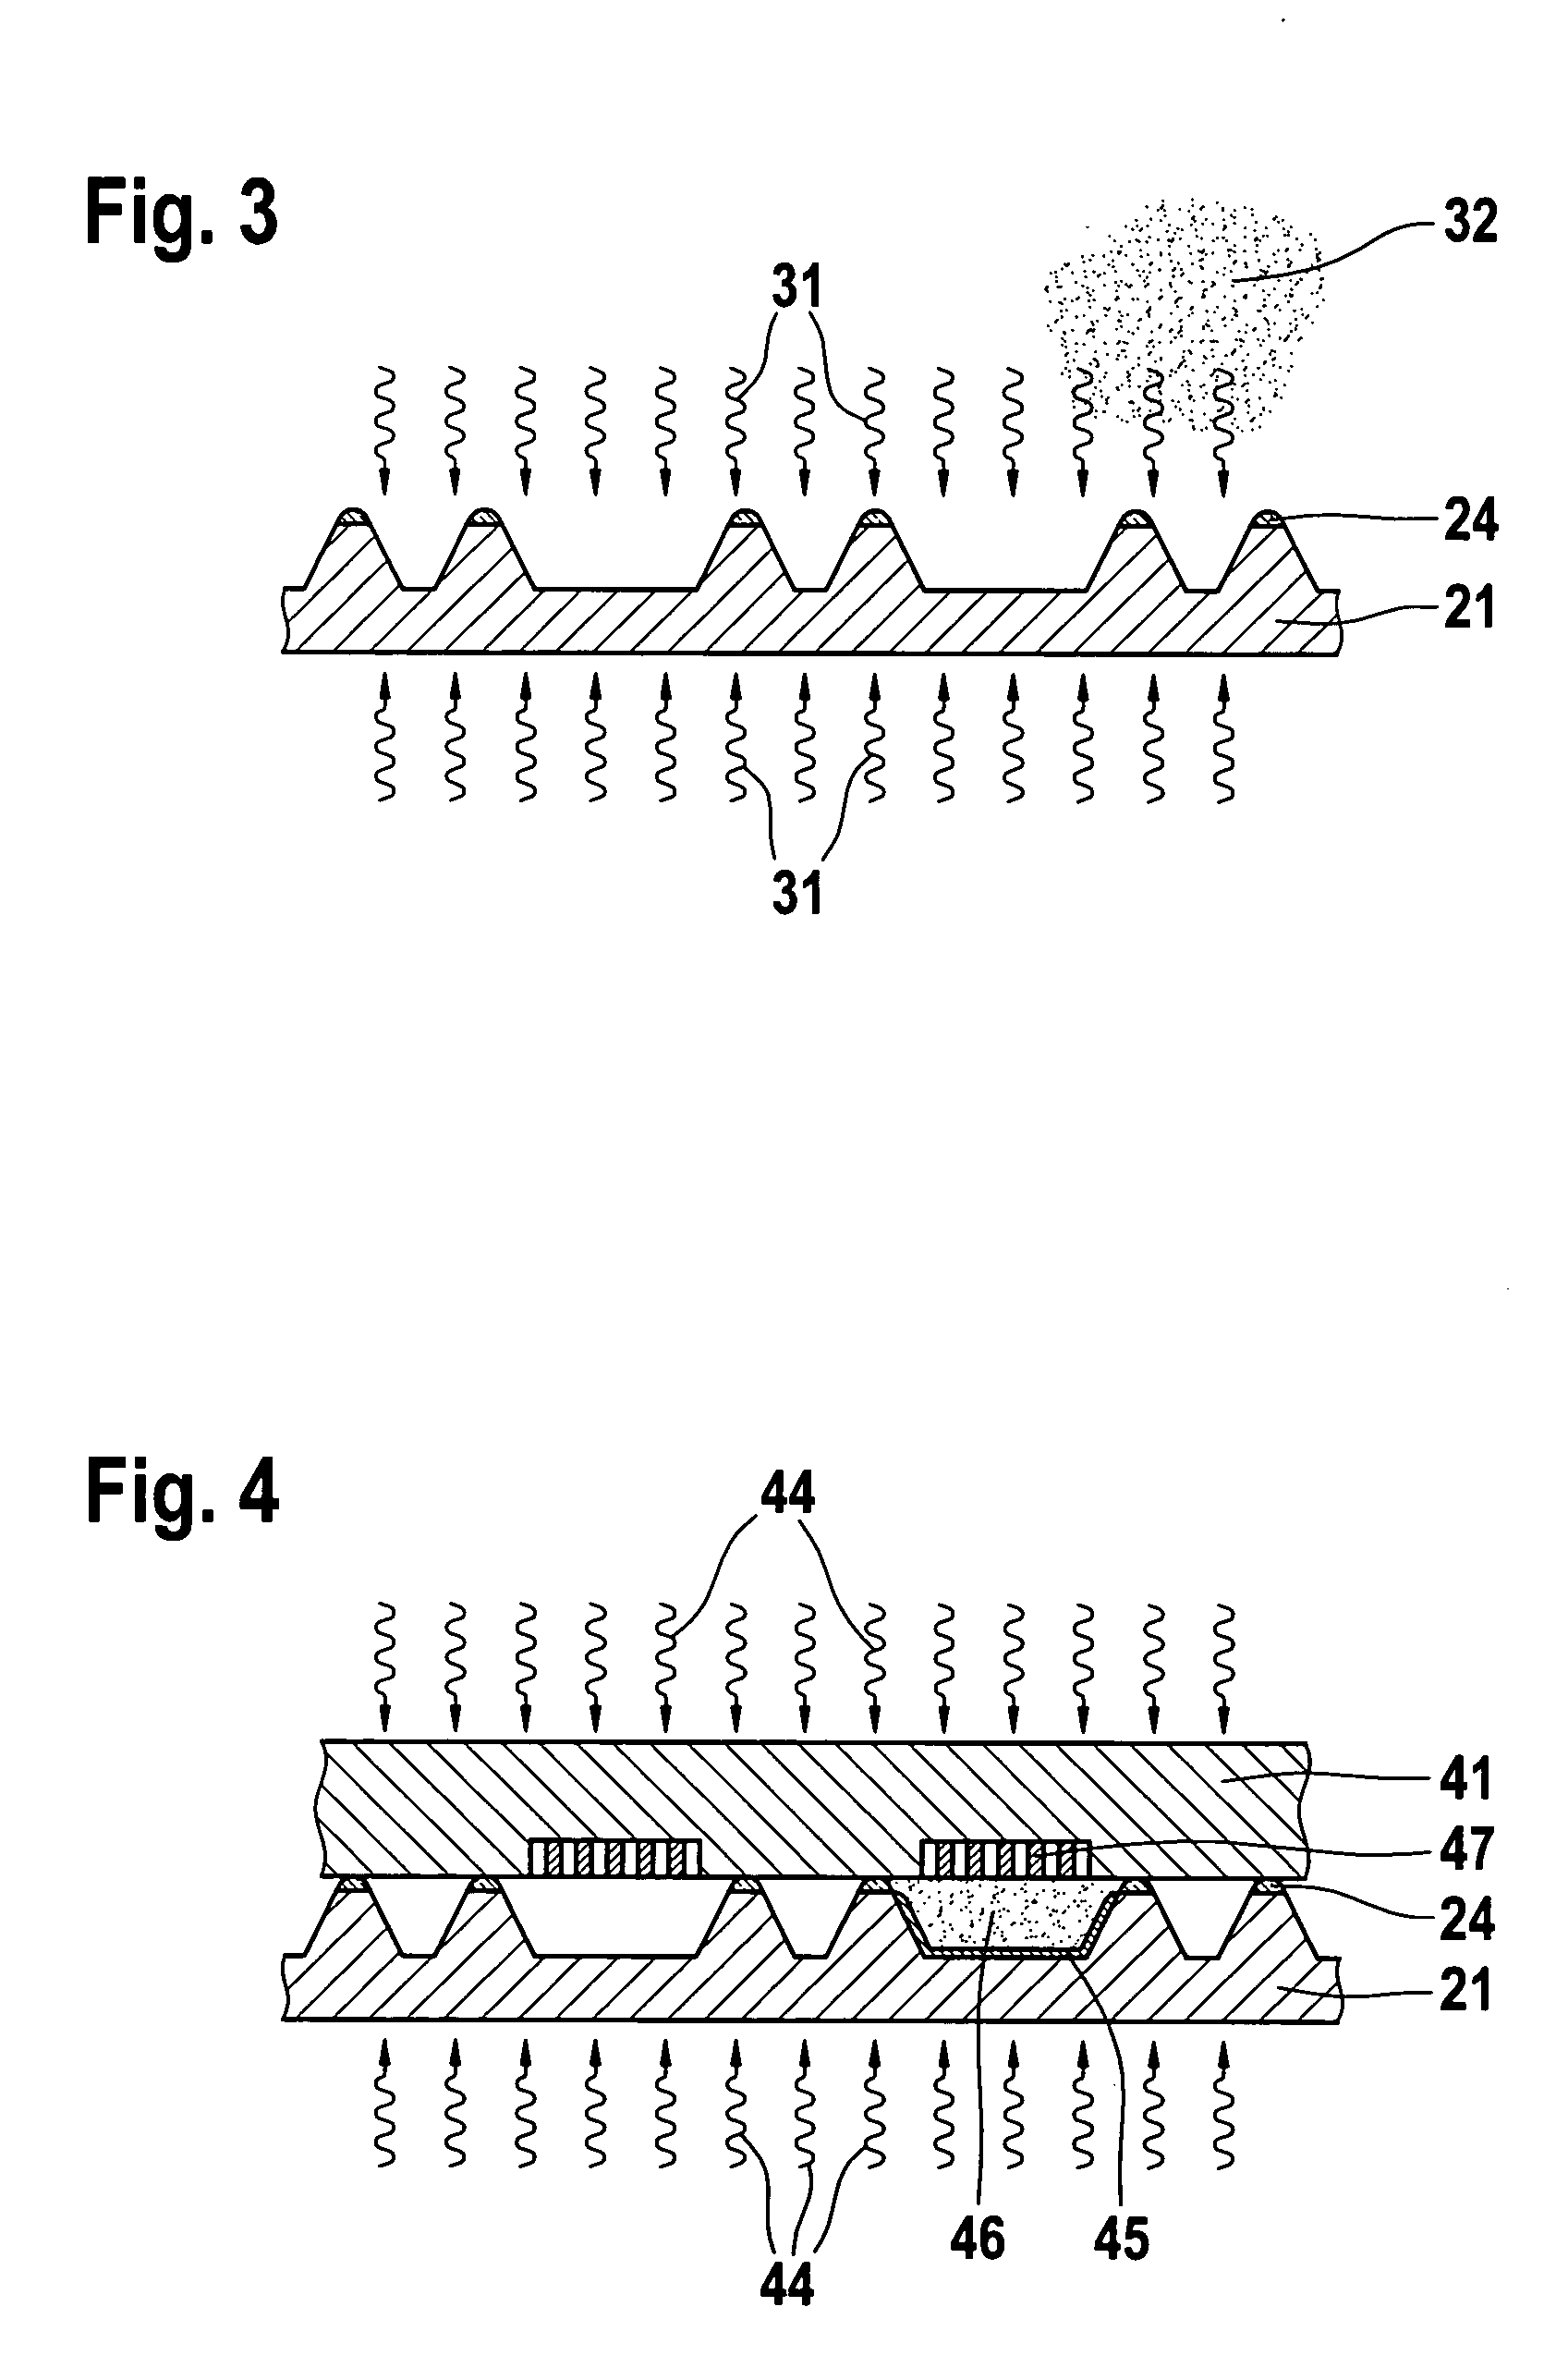 Method for reducing the adhesive properties of MEMS and anti-adhesion-coated device